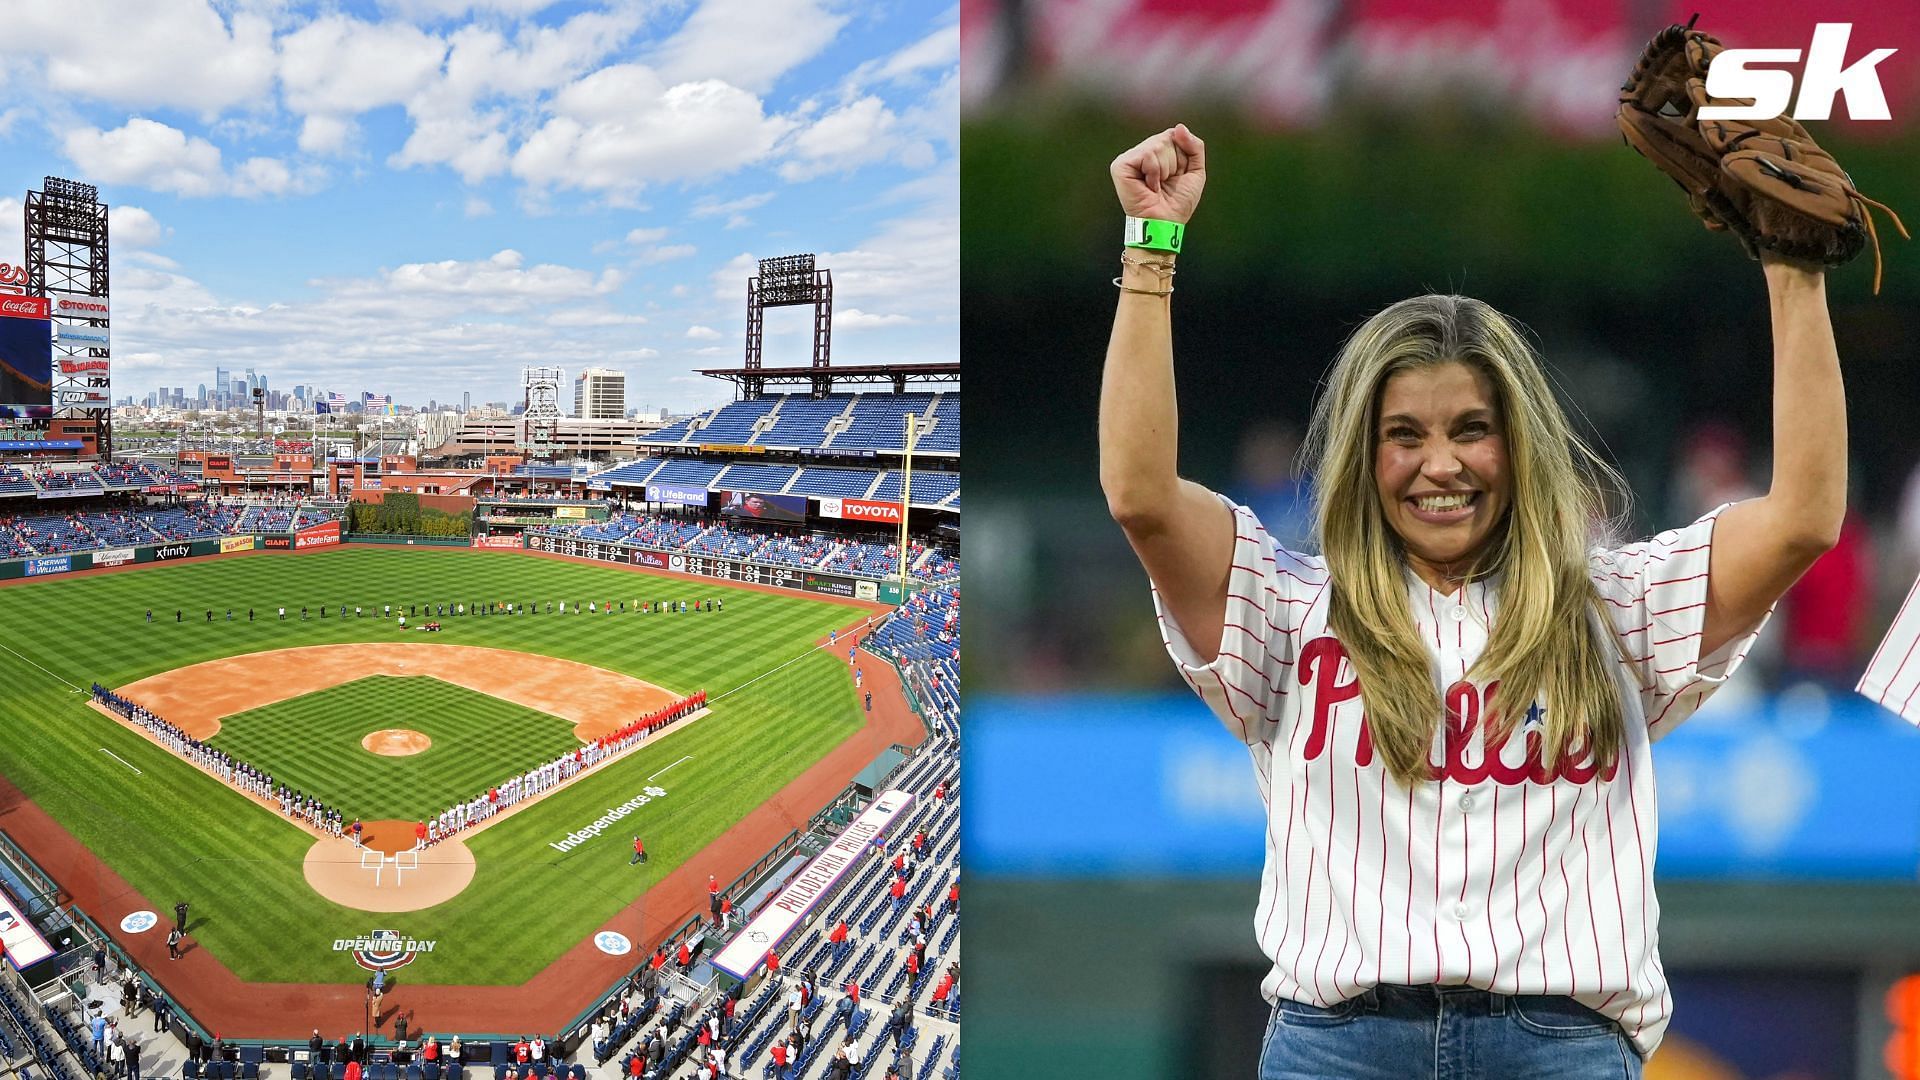 &quot;Boy Meets World&quot; star Topanga throws first pitch at Phillies game